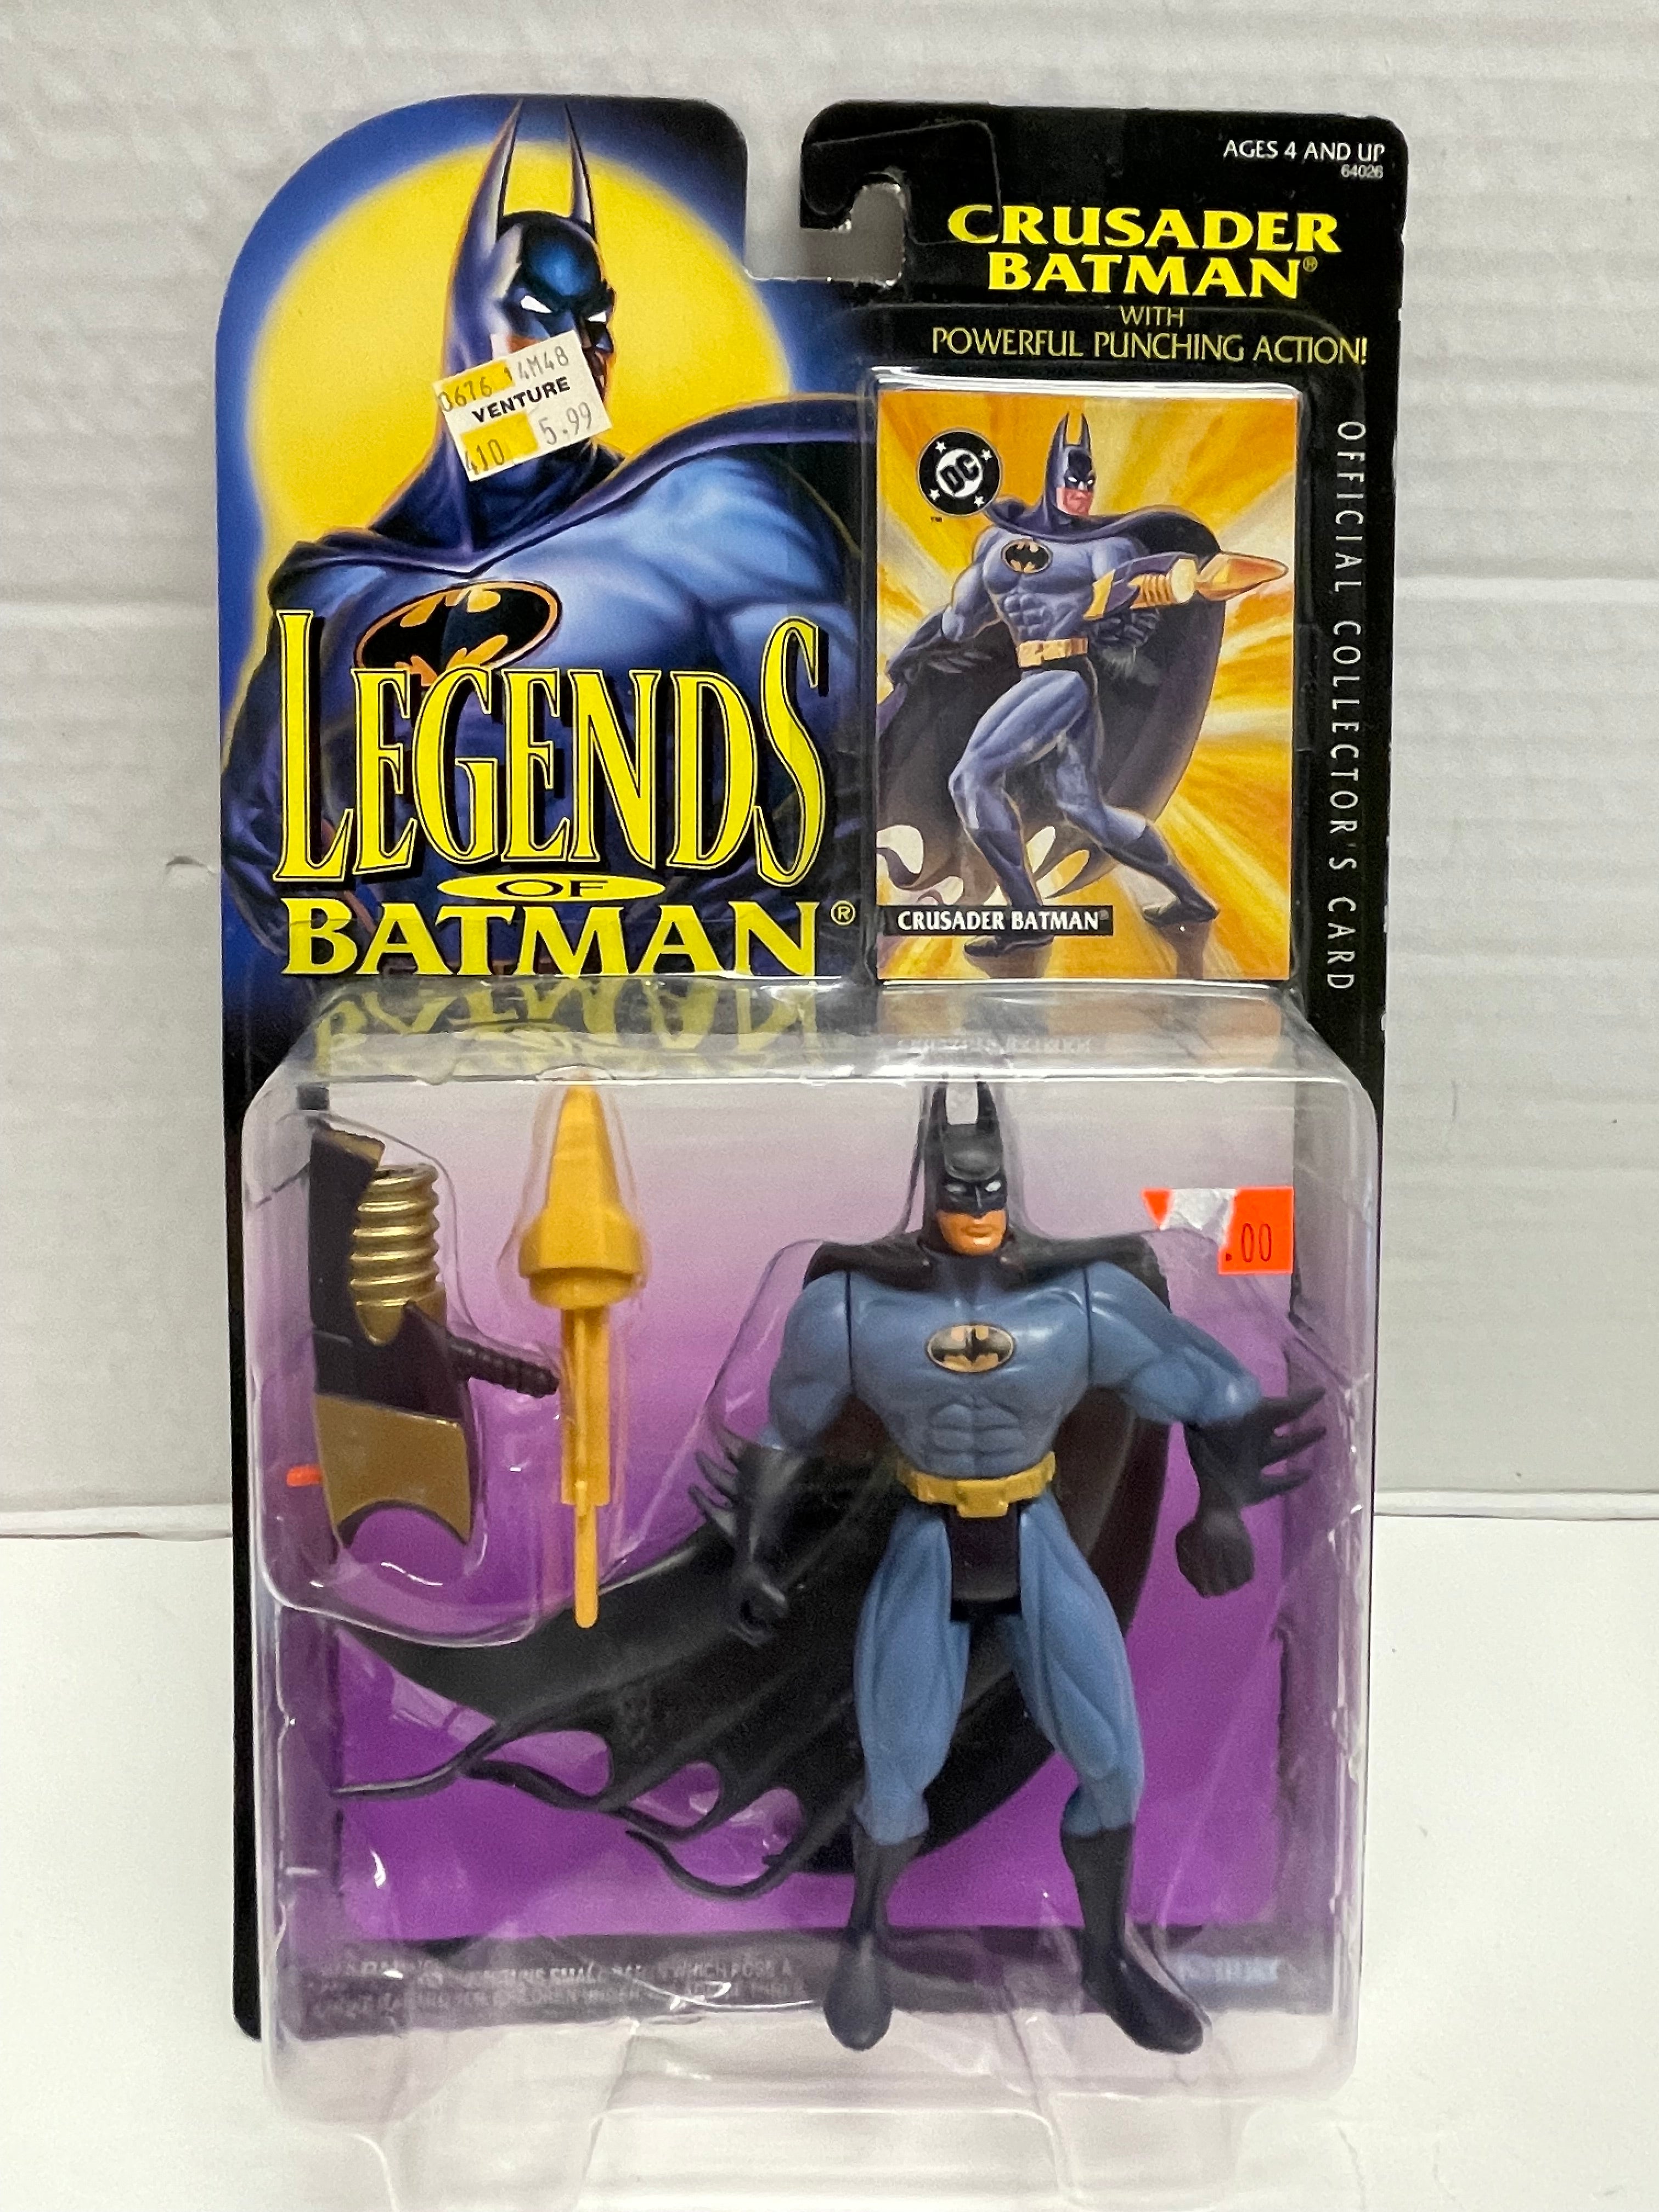 Legends of Batman Crusader Batman Action Figure & Official Collector's –  Back In Time Comics and Toys